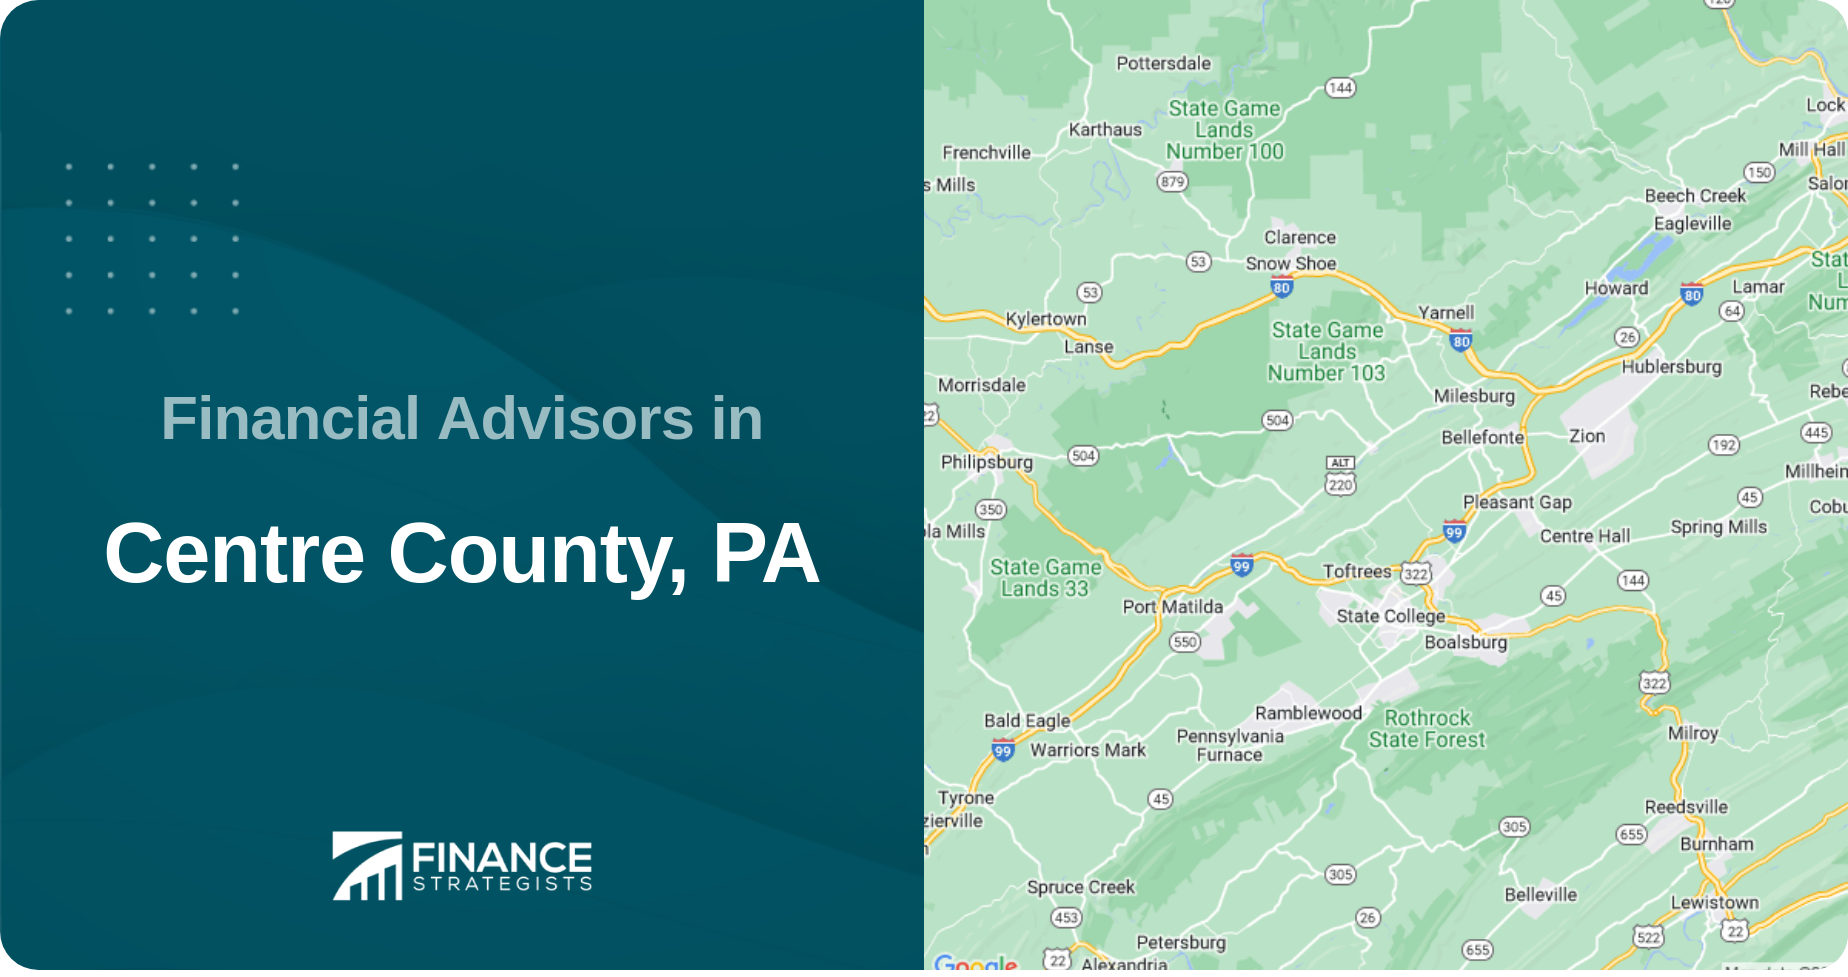 Financial Advisors in Centre County, PA